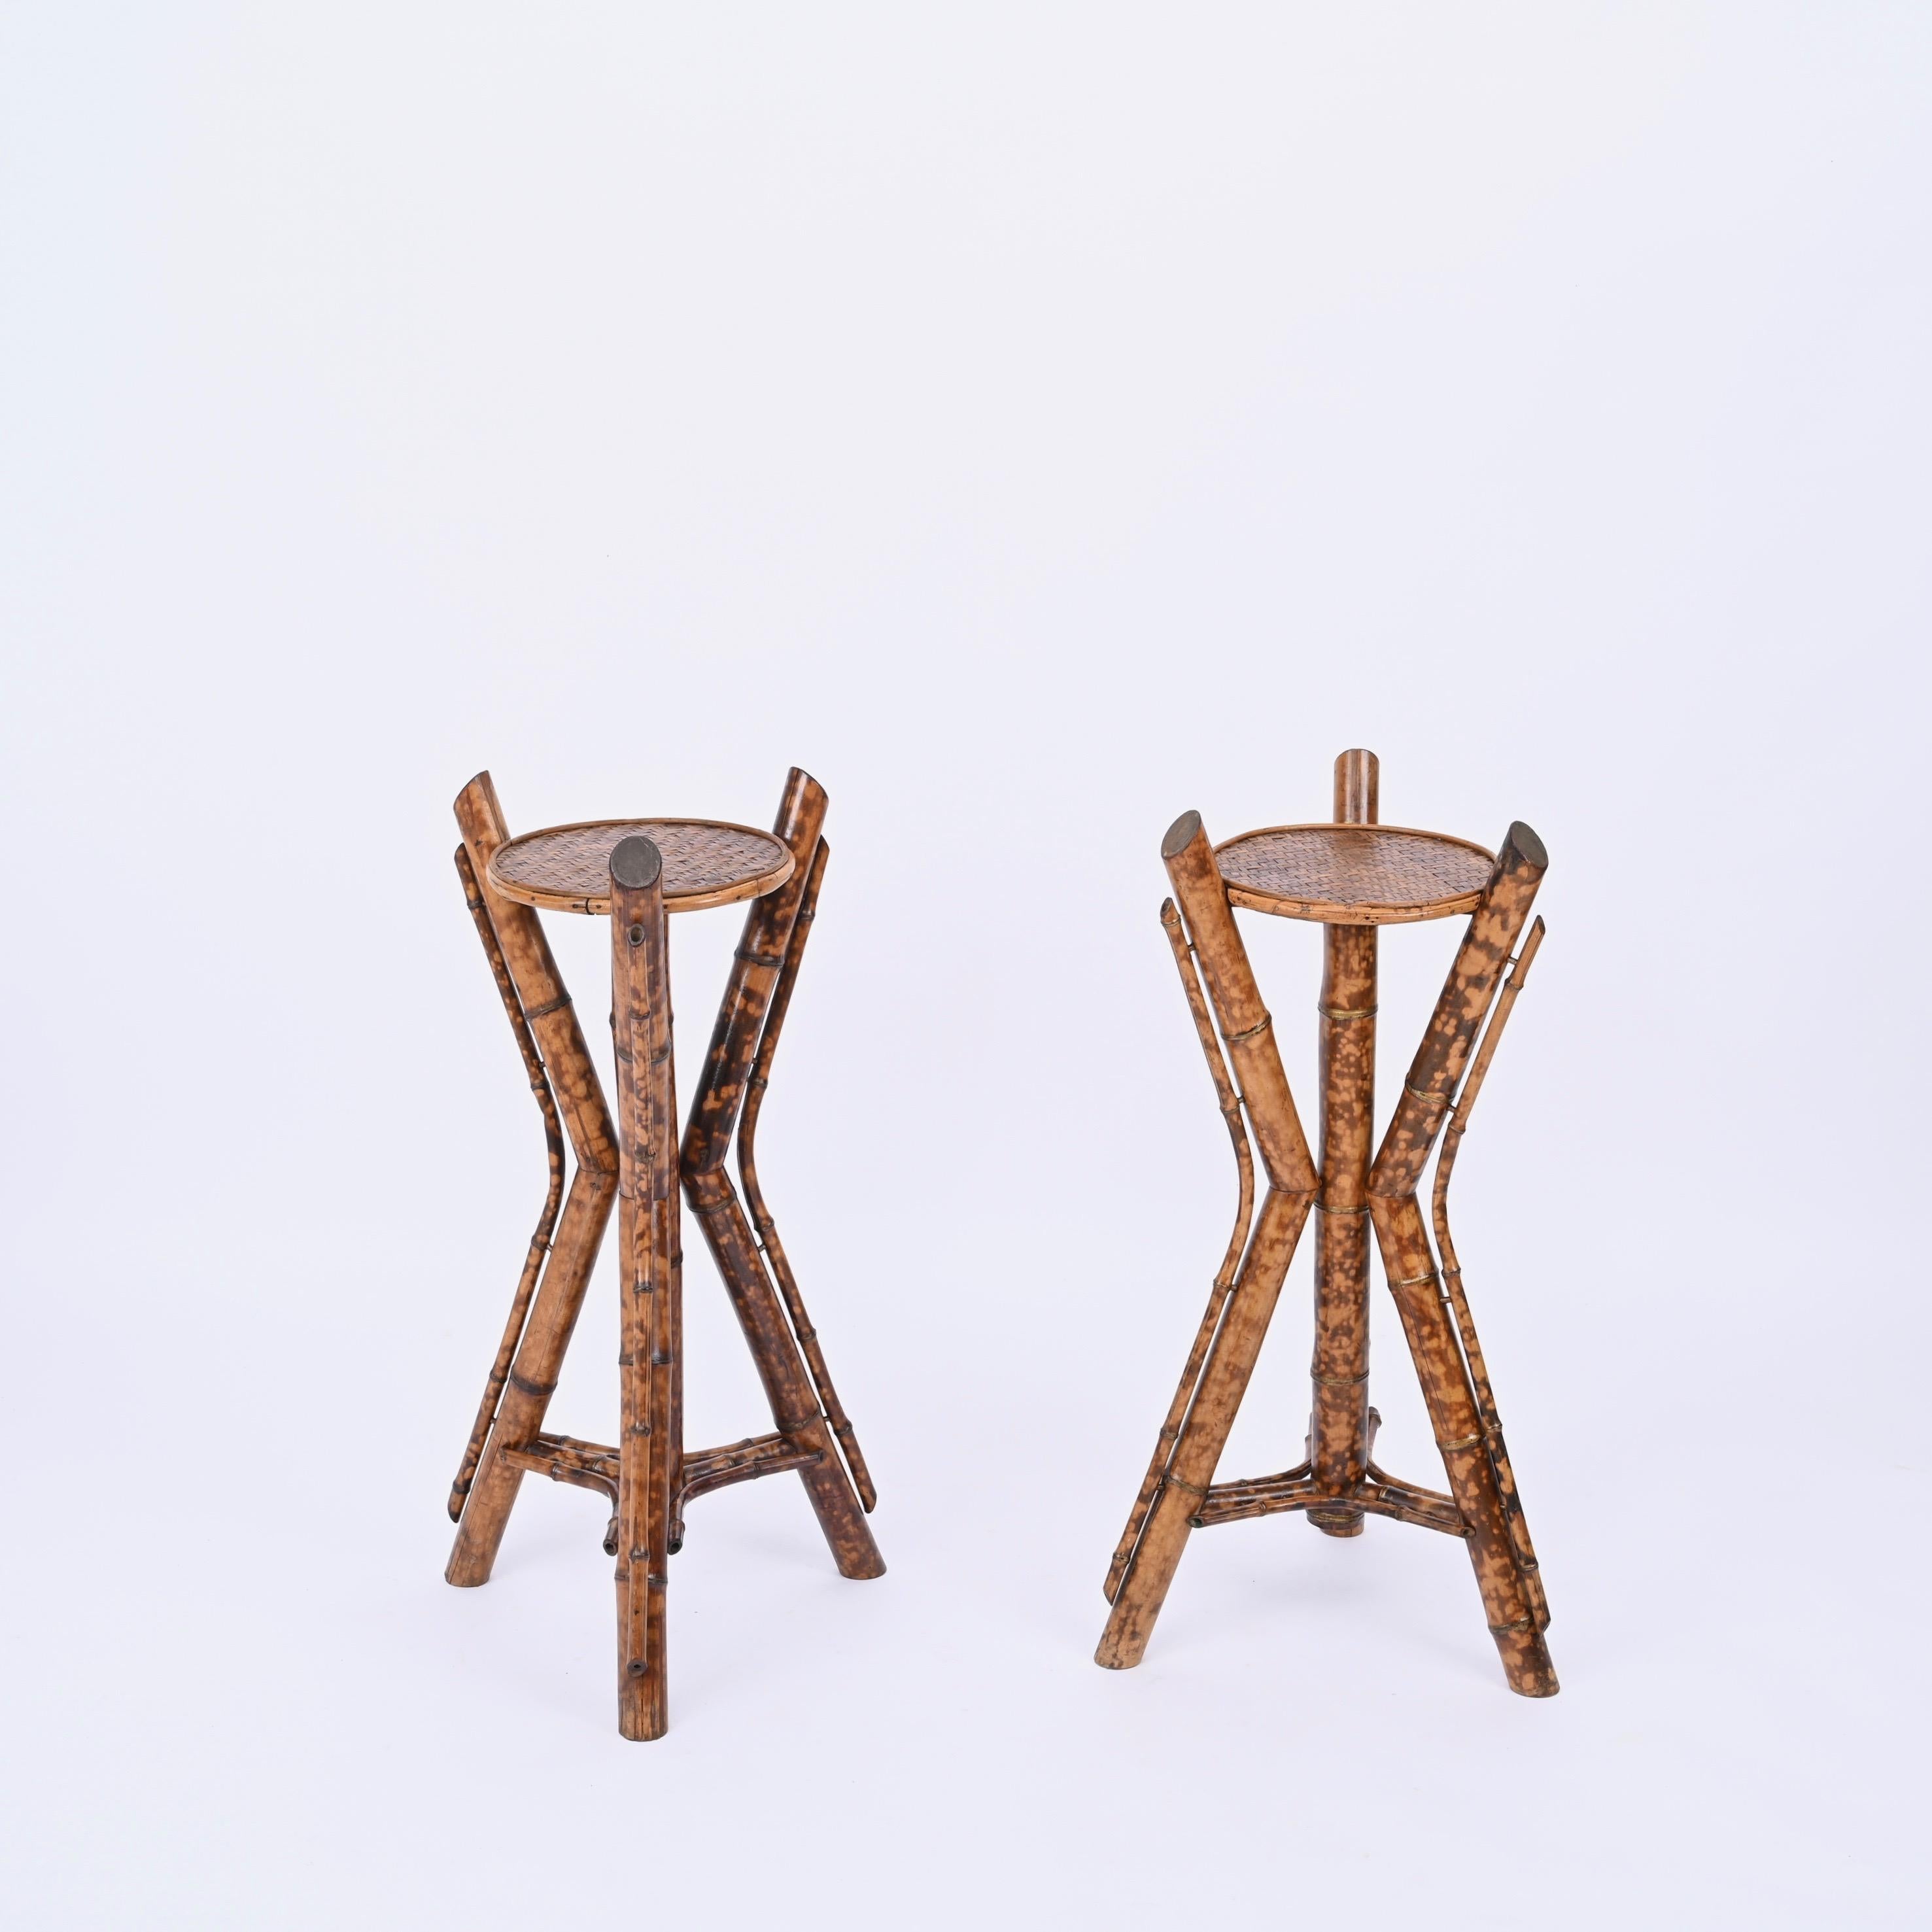 Italian Tiger Bamboo Tripod Pedestals or Plant Stands, Italy 1950s For Sale 2